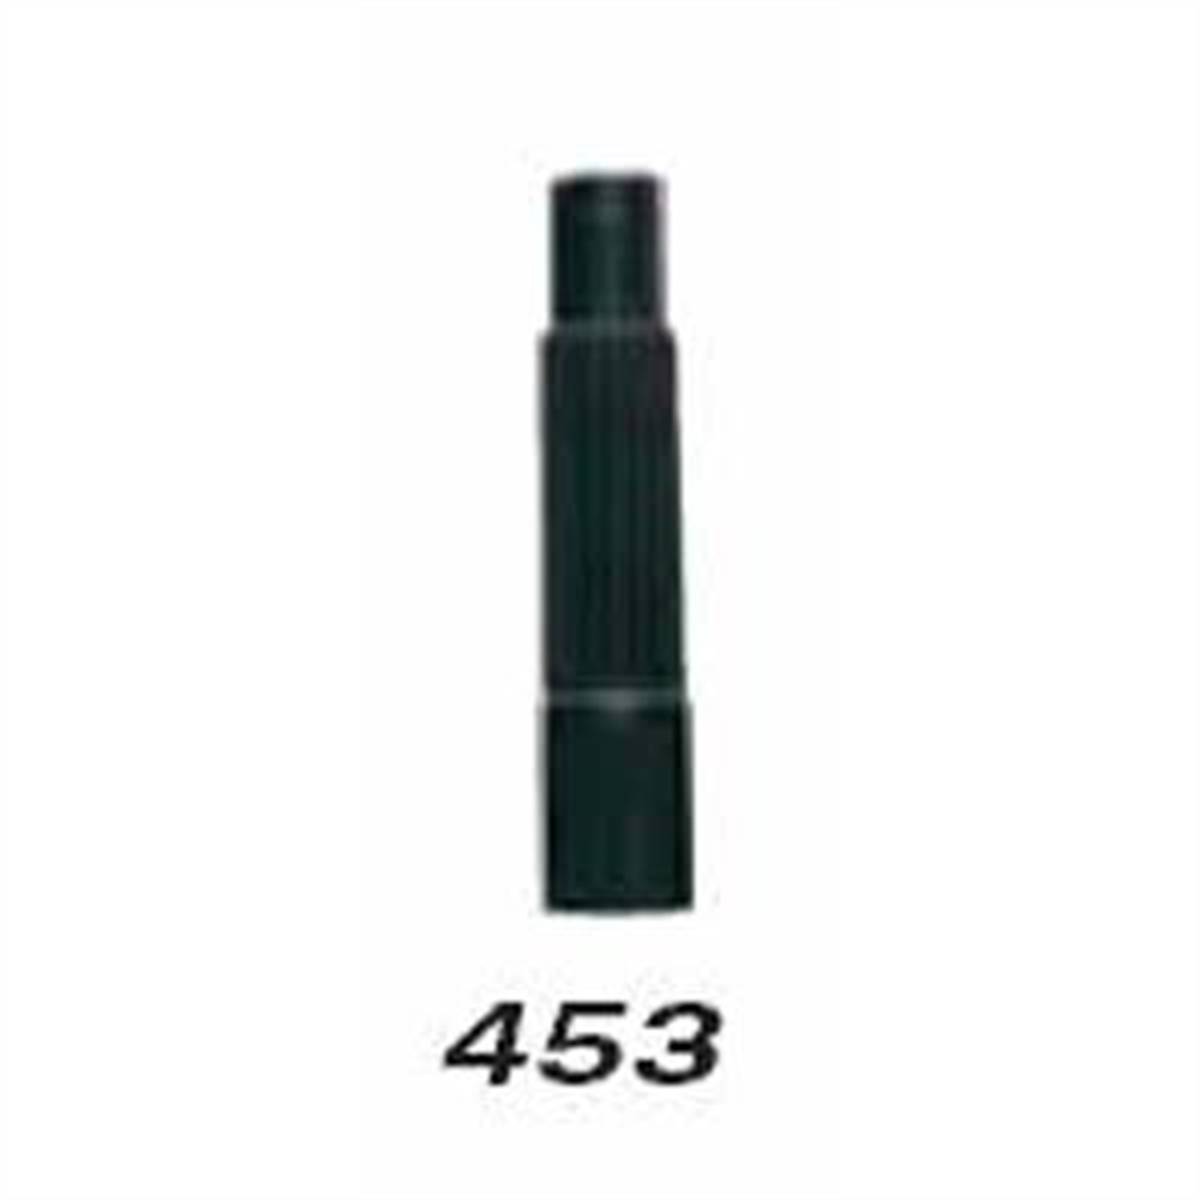 Plastic Tire Valve Extension - 1-1/2 In Effective Length